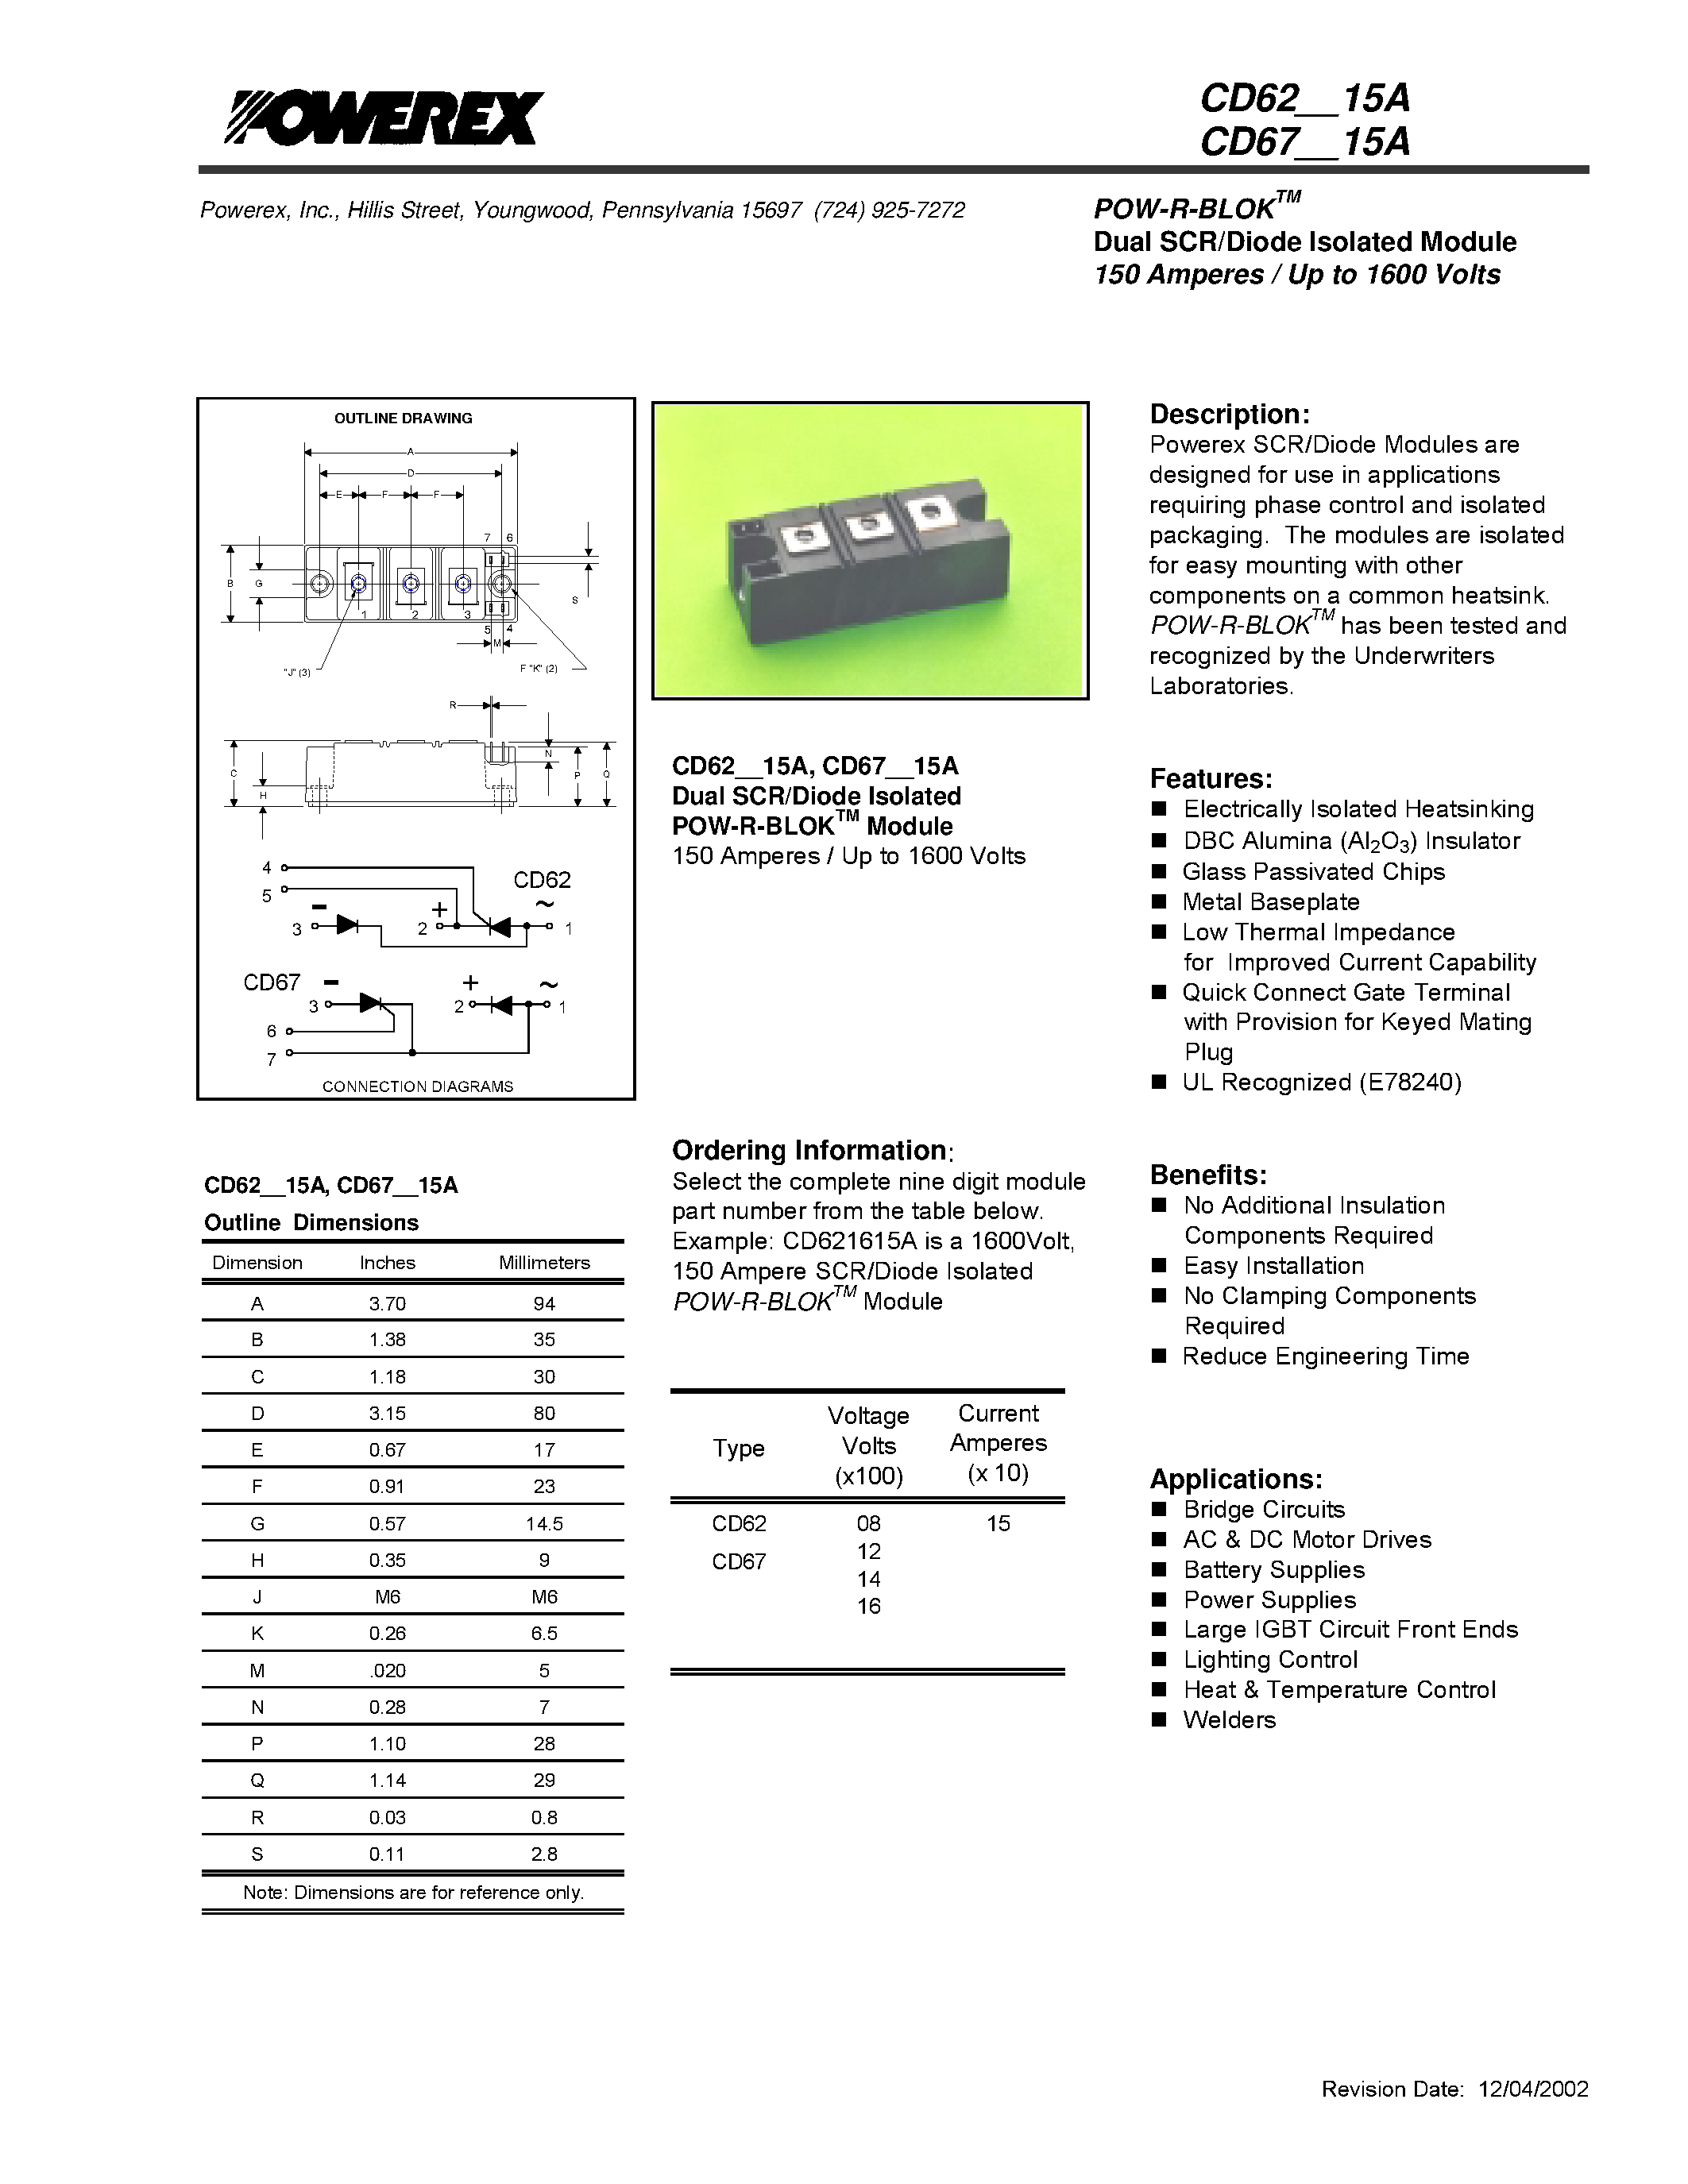 Datasheet CD621215A - POW-R-BLOK Dual SCR/Diode Isolated Module 150 Amperes / Up to 1600 Volts page 1